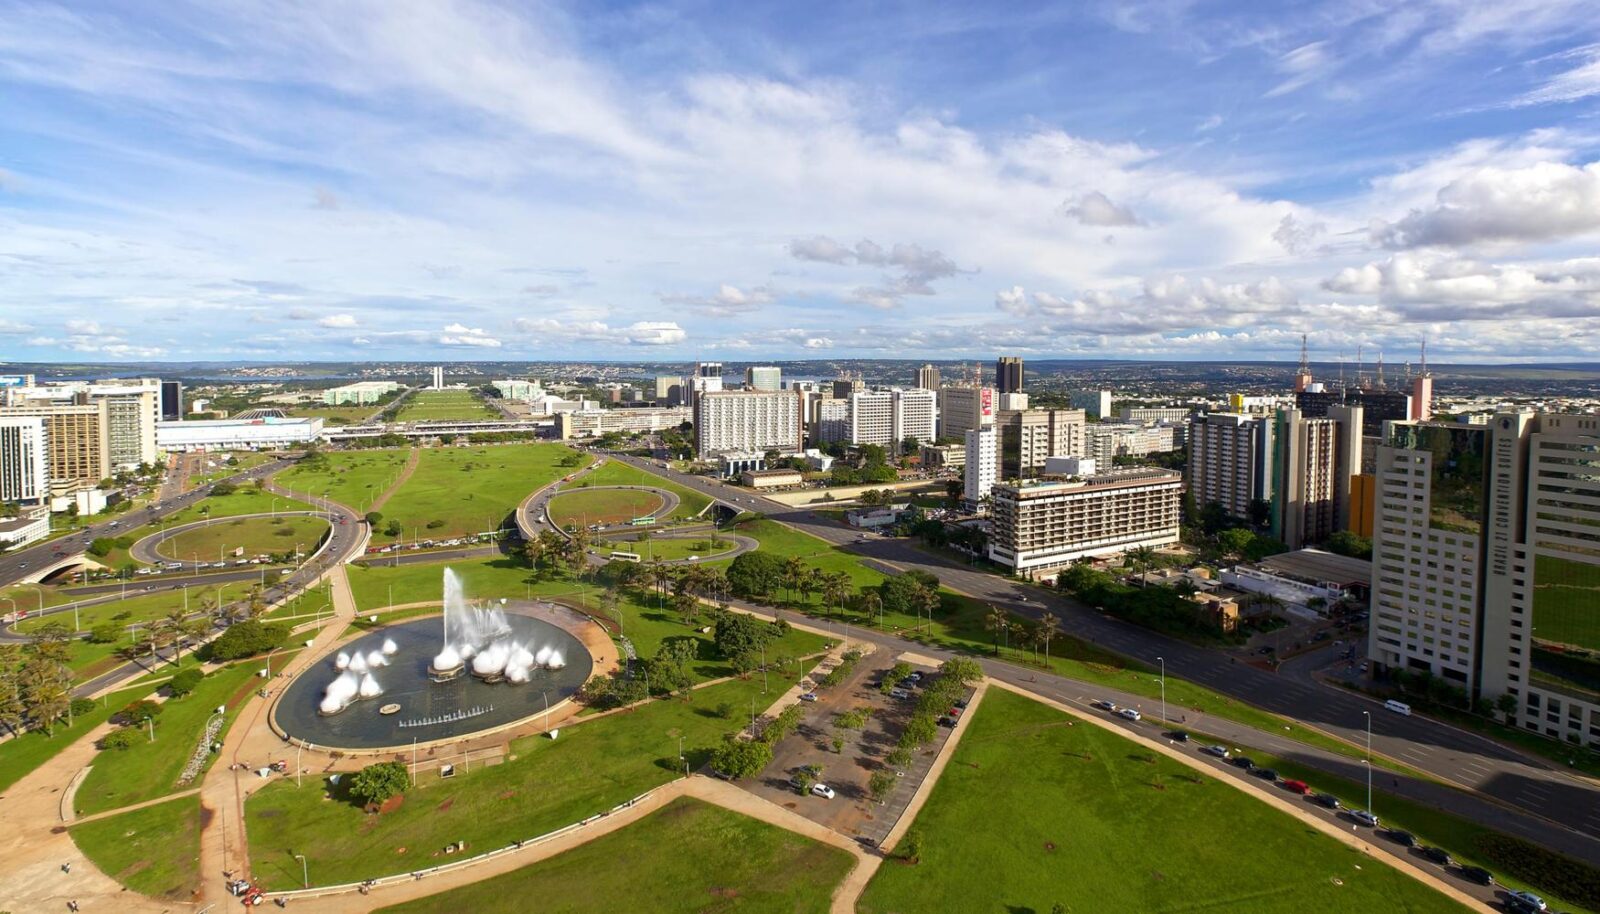 This City-Country Matching Quiz Gets Progressively Harder With Each Question – Can You Keep up With It? Brasília